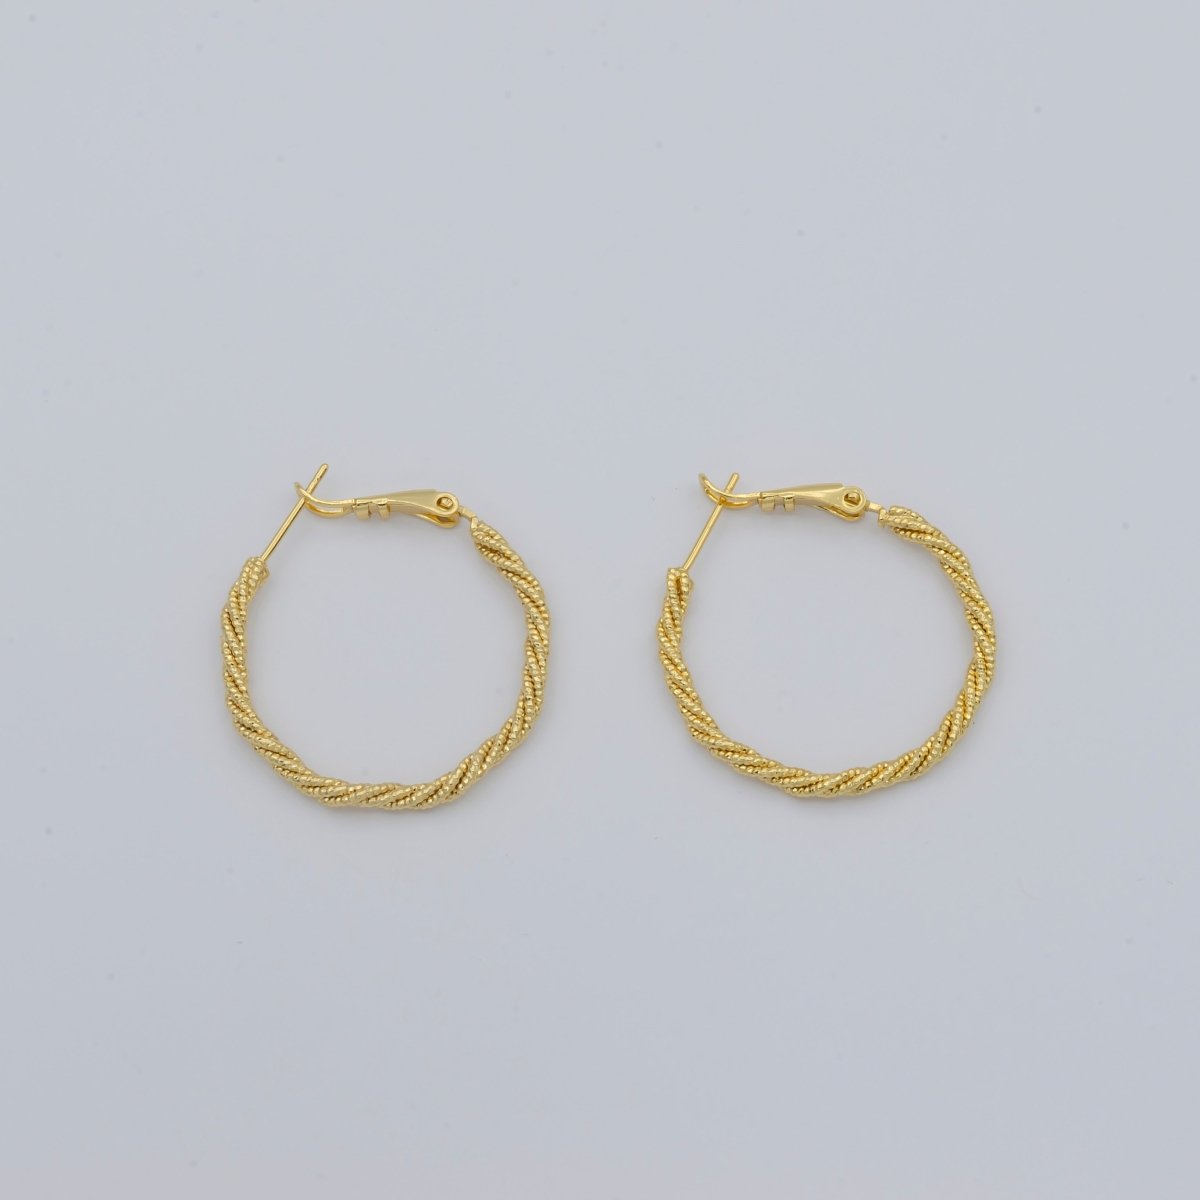 Golden Thin Circle Round Braid Huggies Earrings, Plain Gold Filled Geometric Shape Casual/Formal Daily Earring Jewelry P-107 - DLUXCA